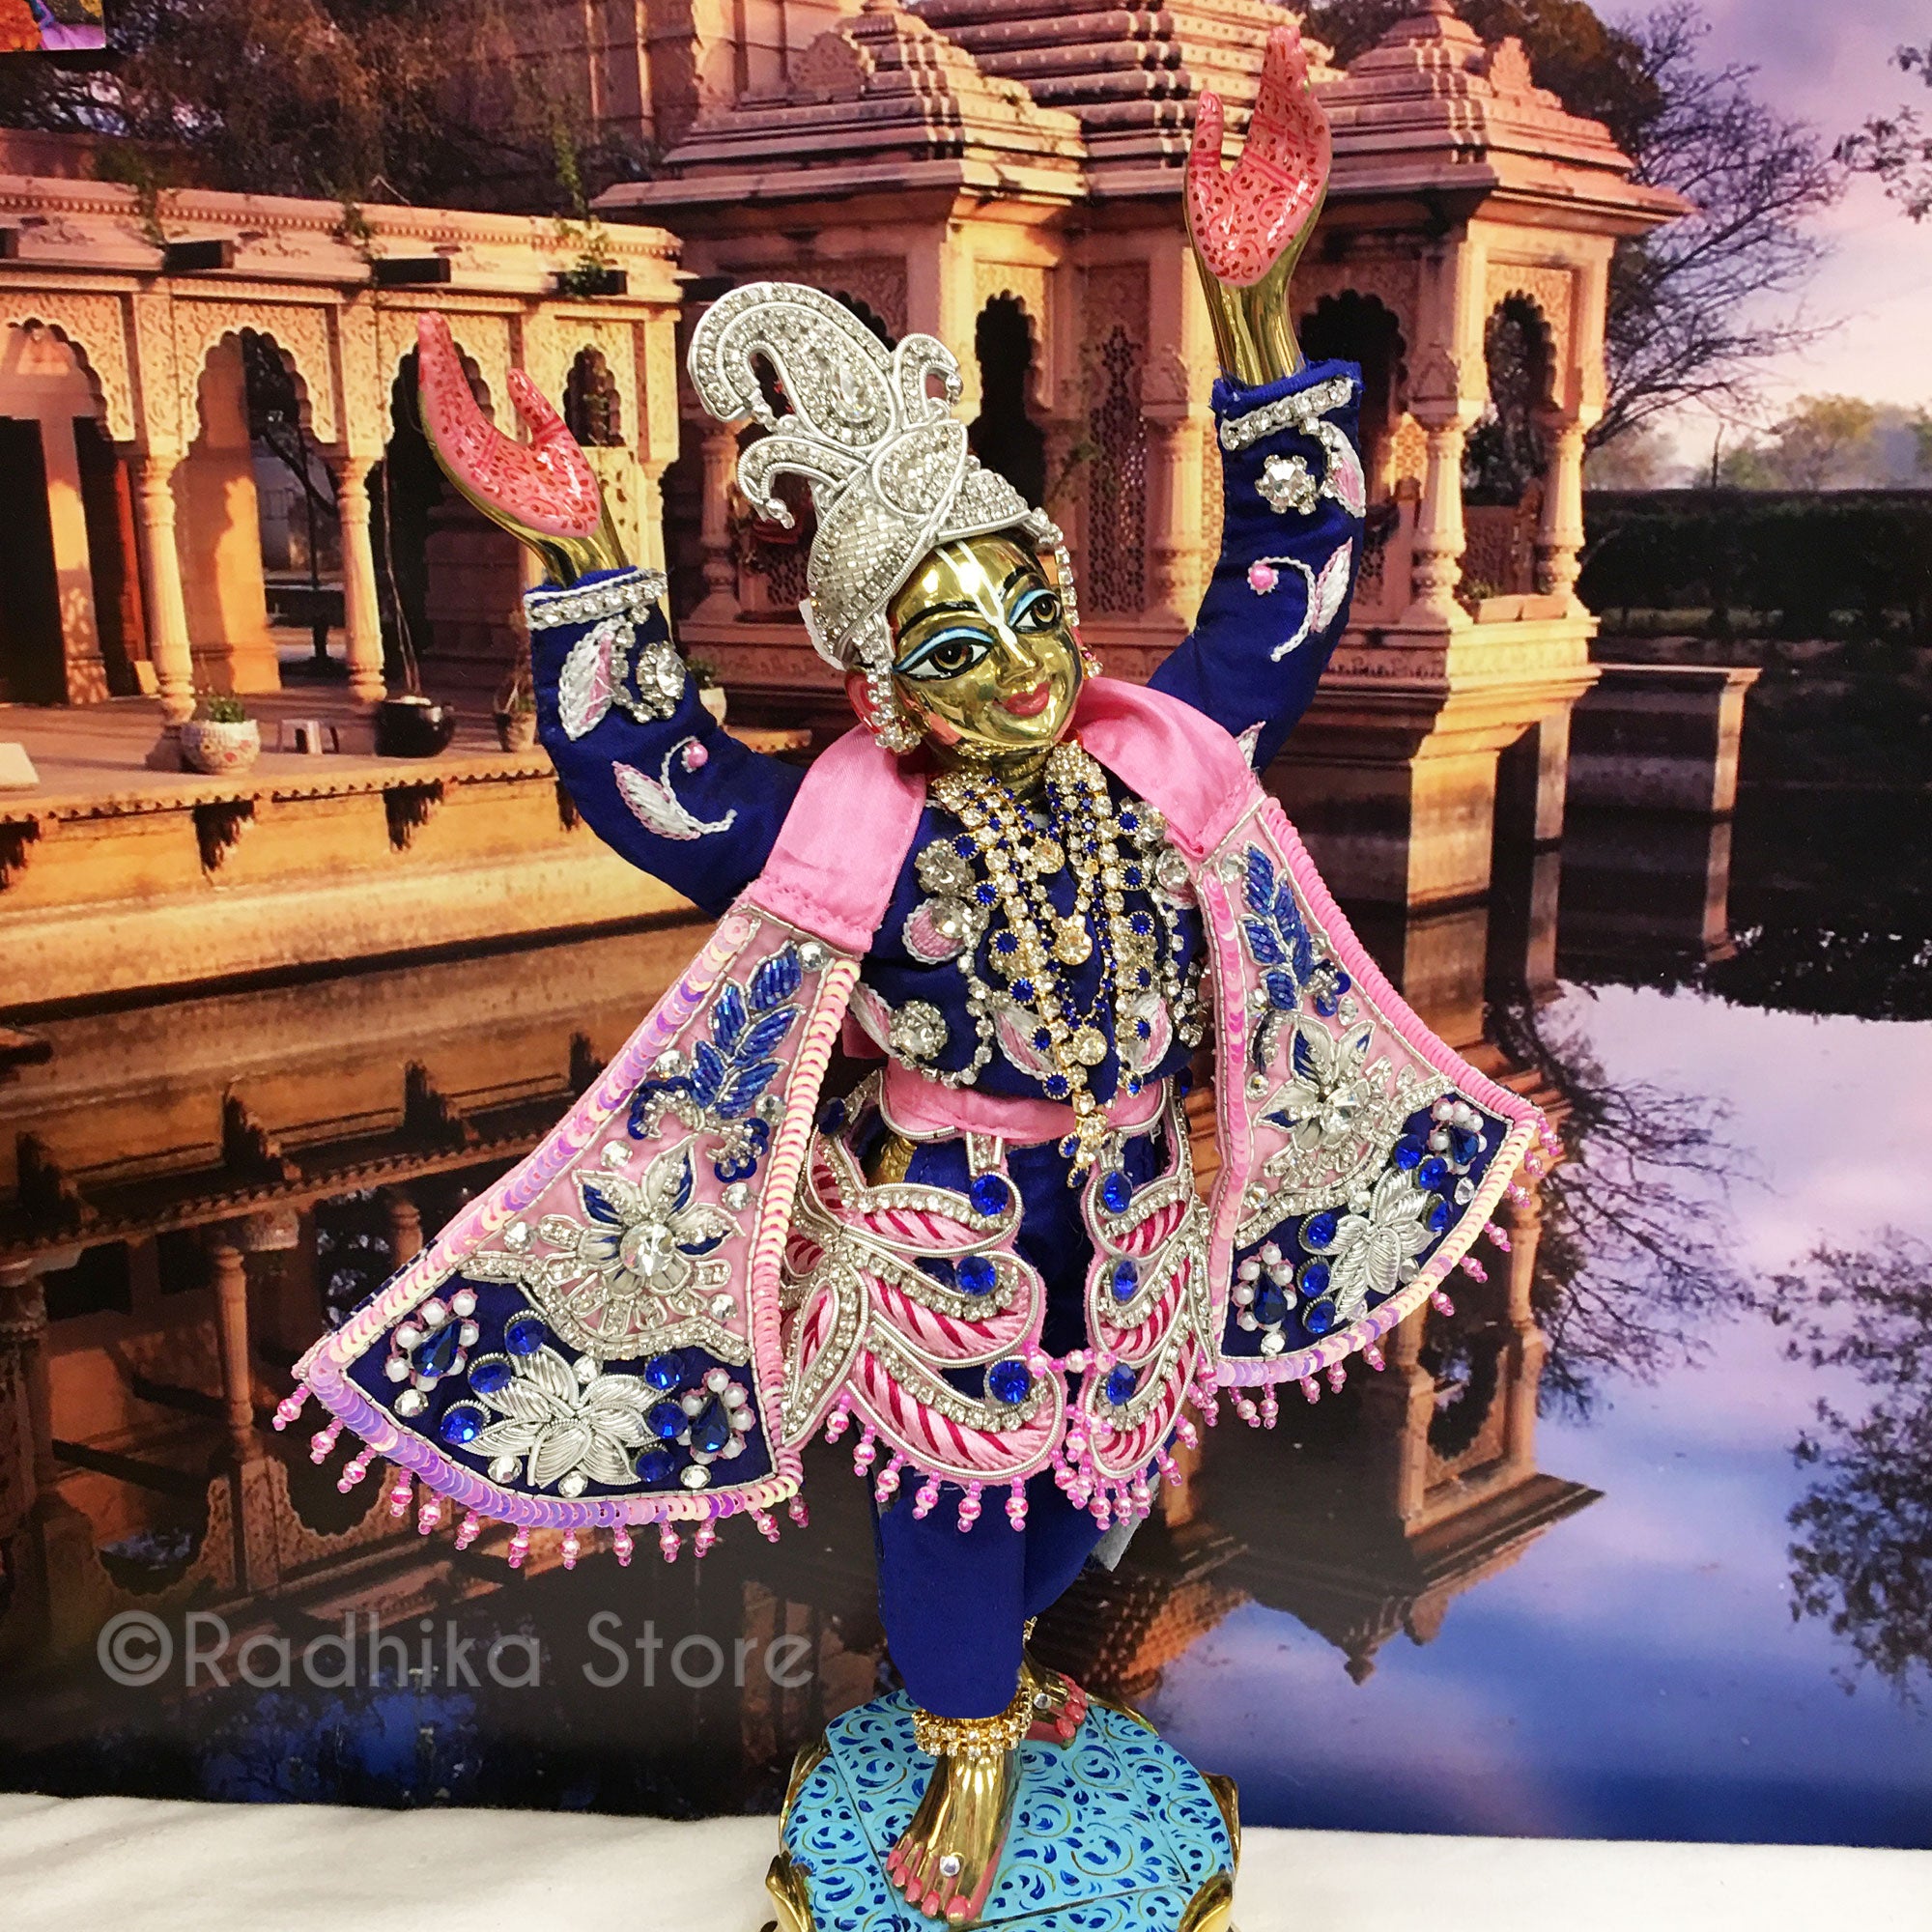 Nine Island Lotus - With Pink and Blue Colors - Gaura Nitai Deity Outfit